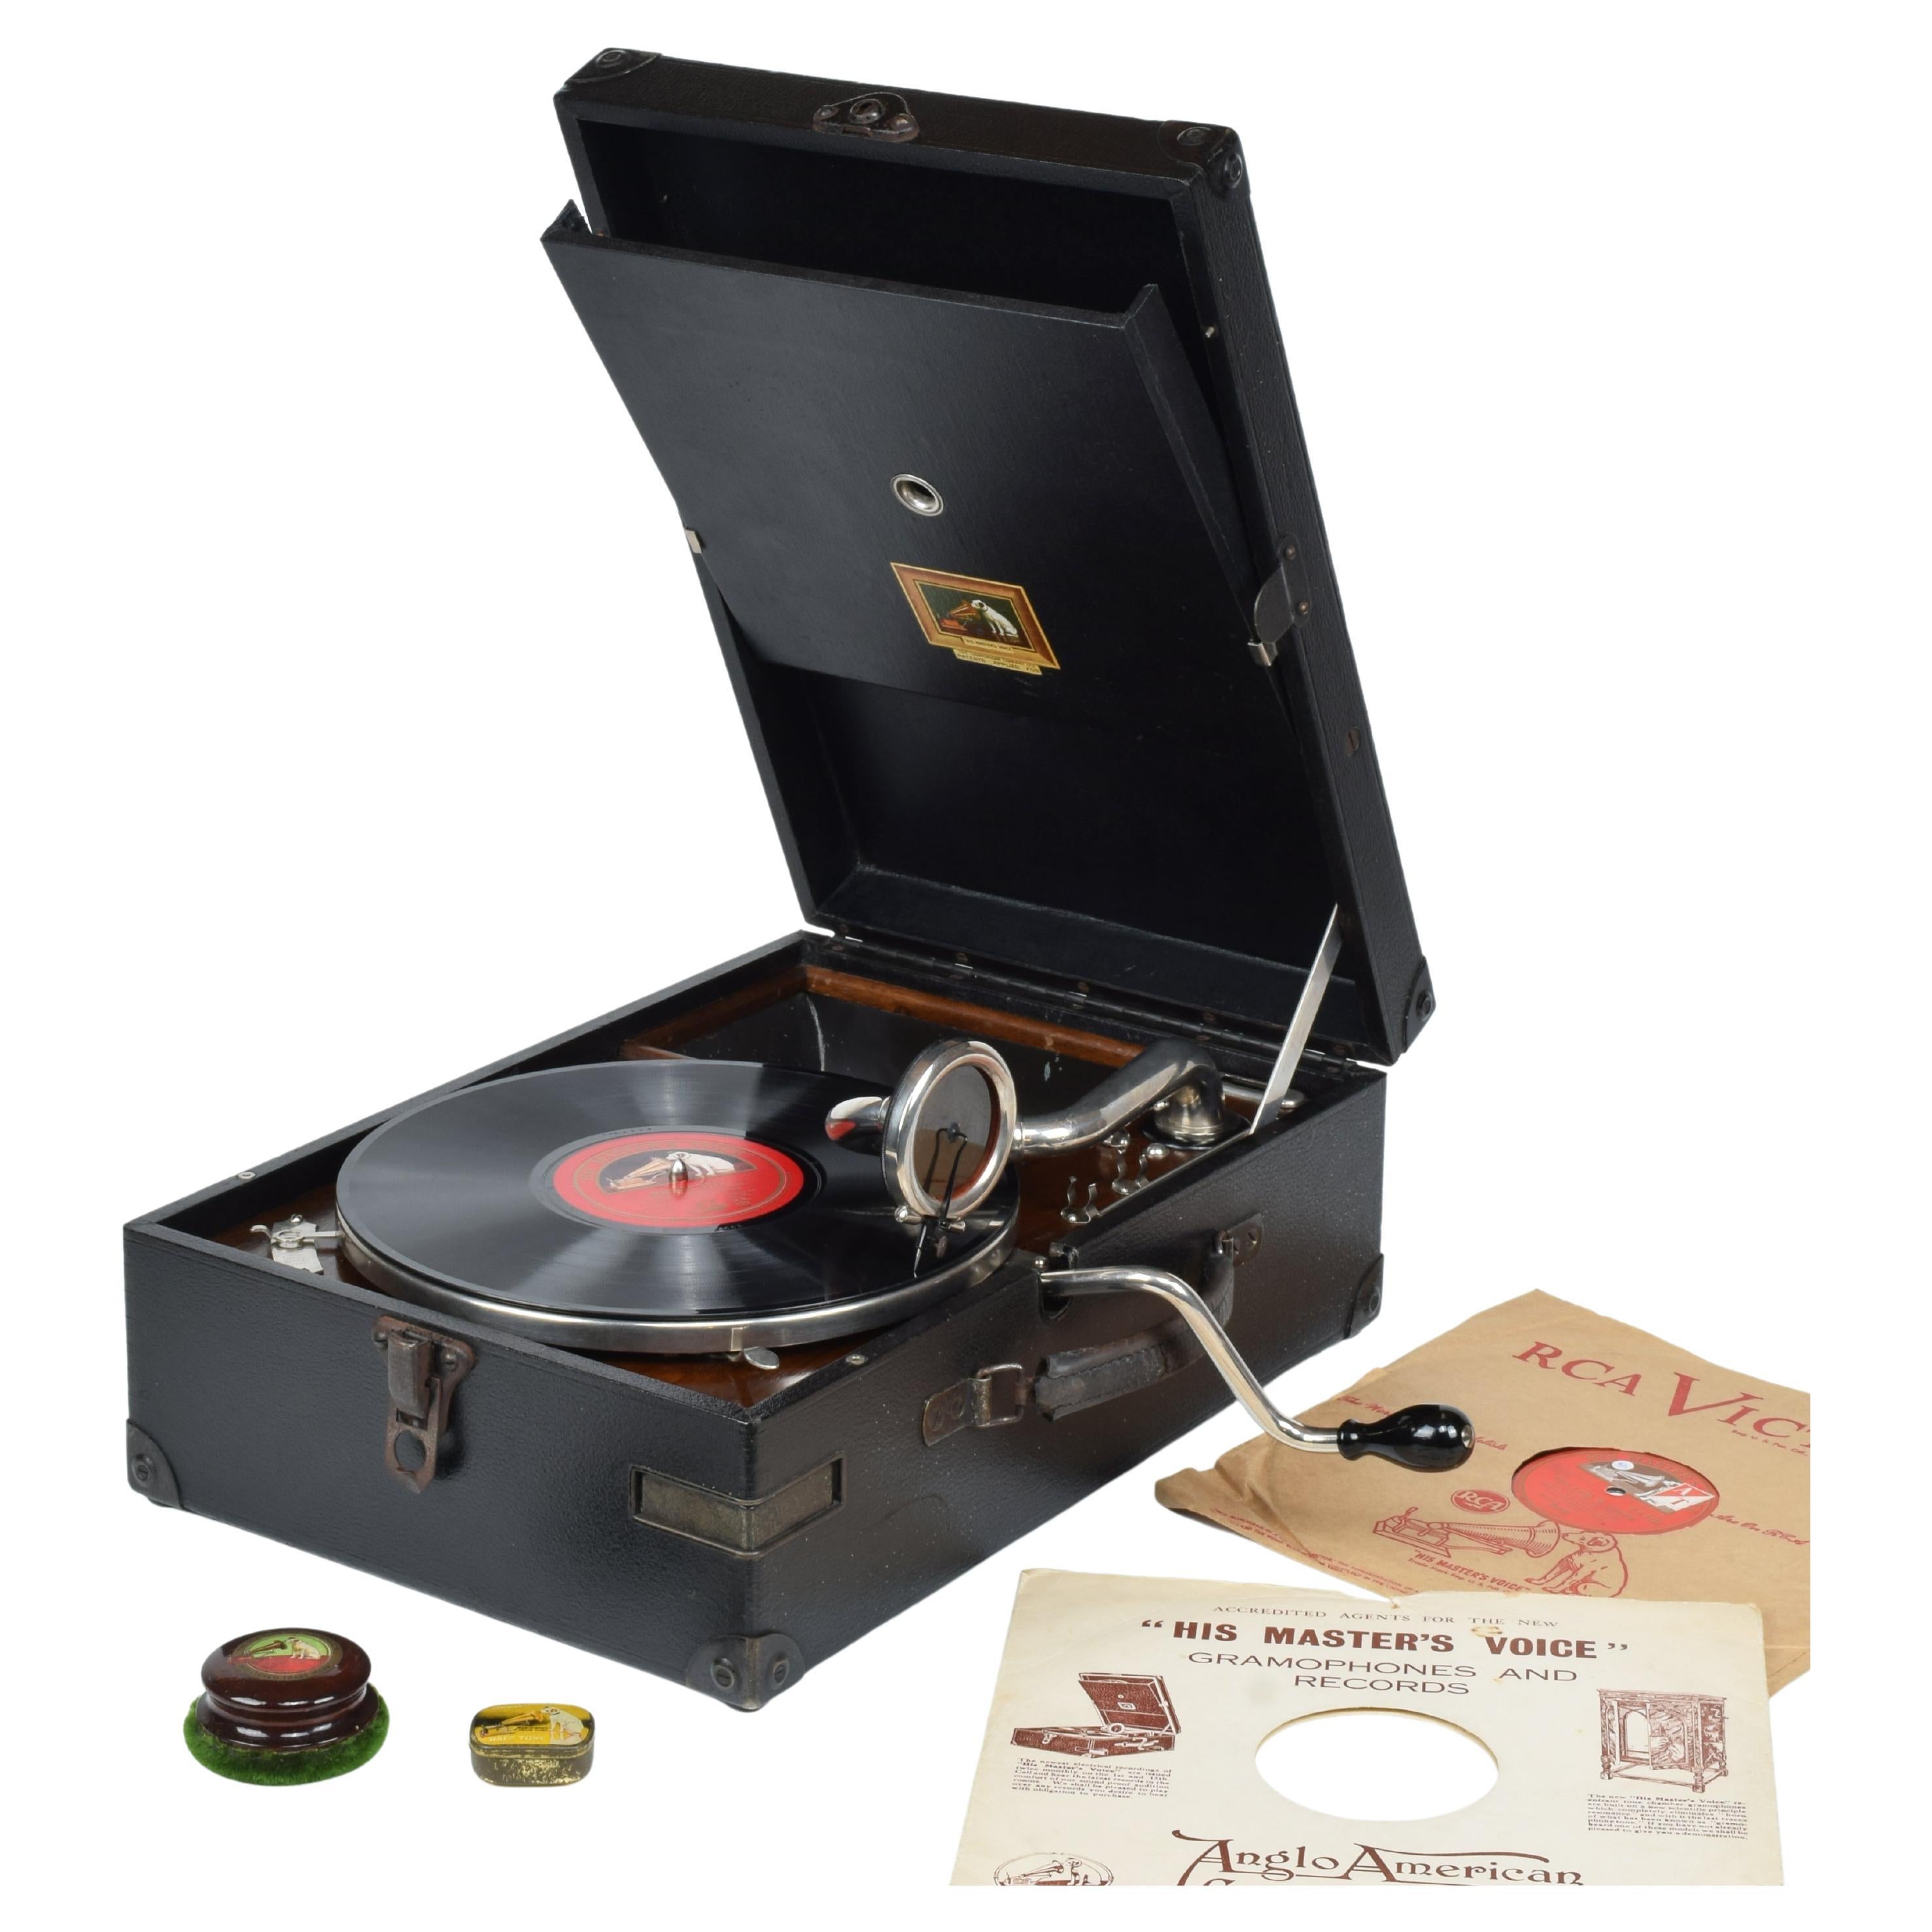 HMV Portable Gramophone 101 with Accessories & Records, Super Working Phonograph